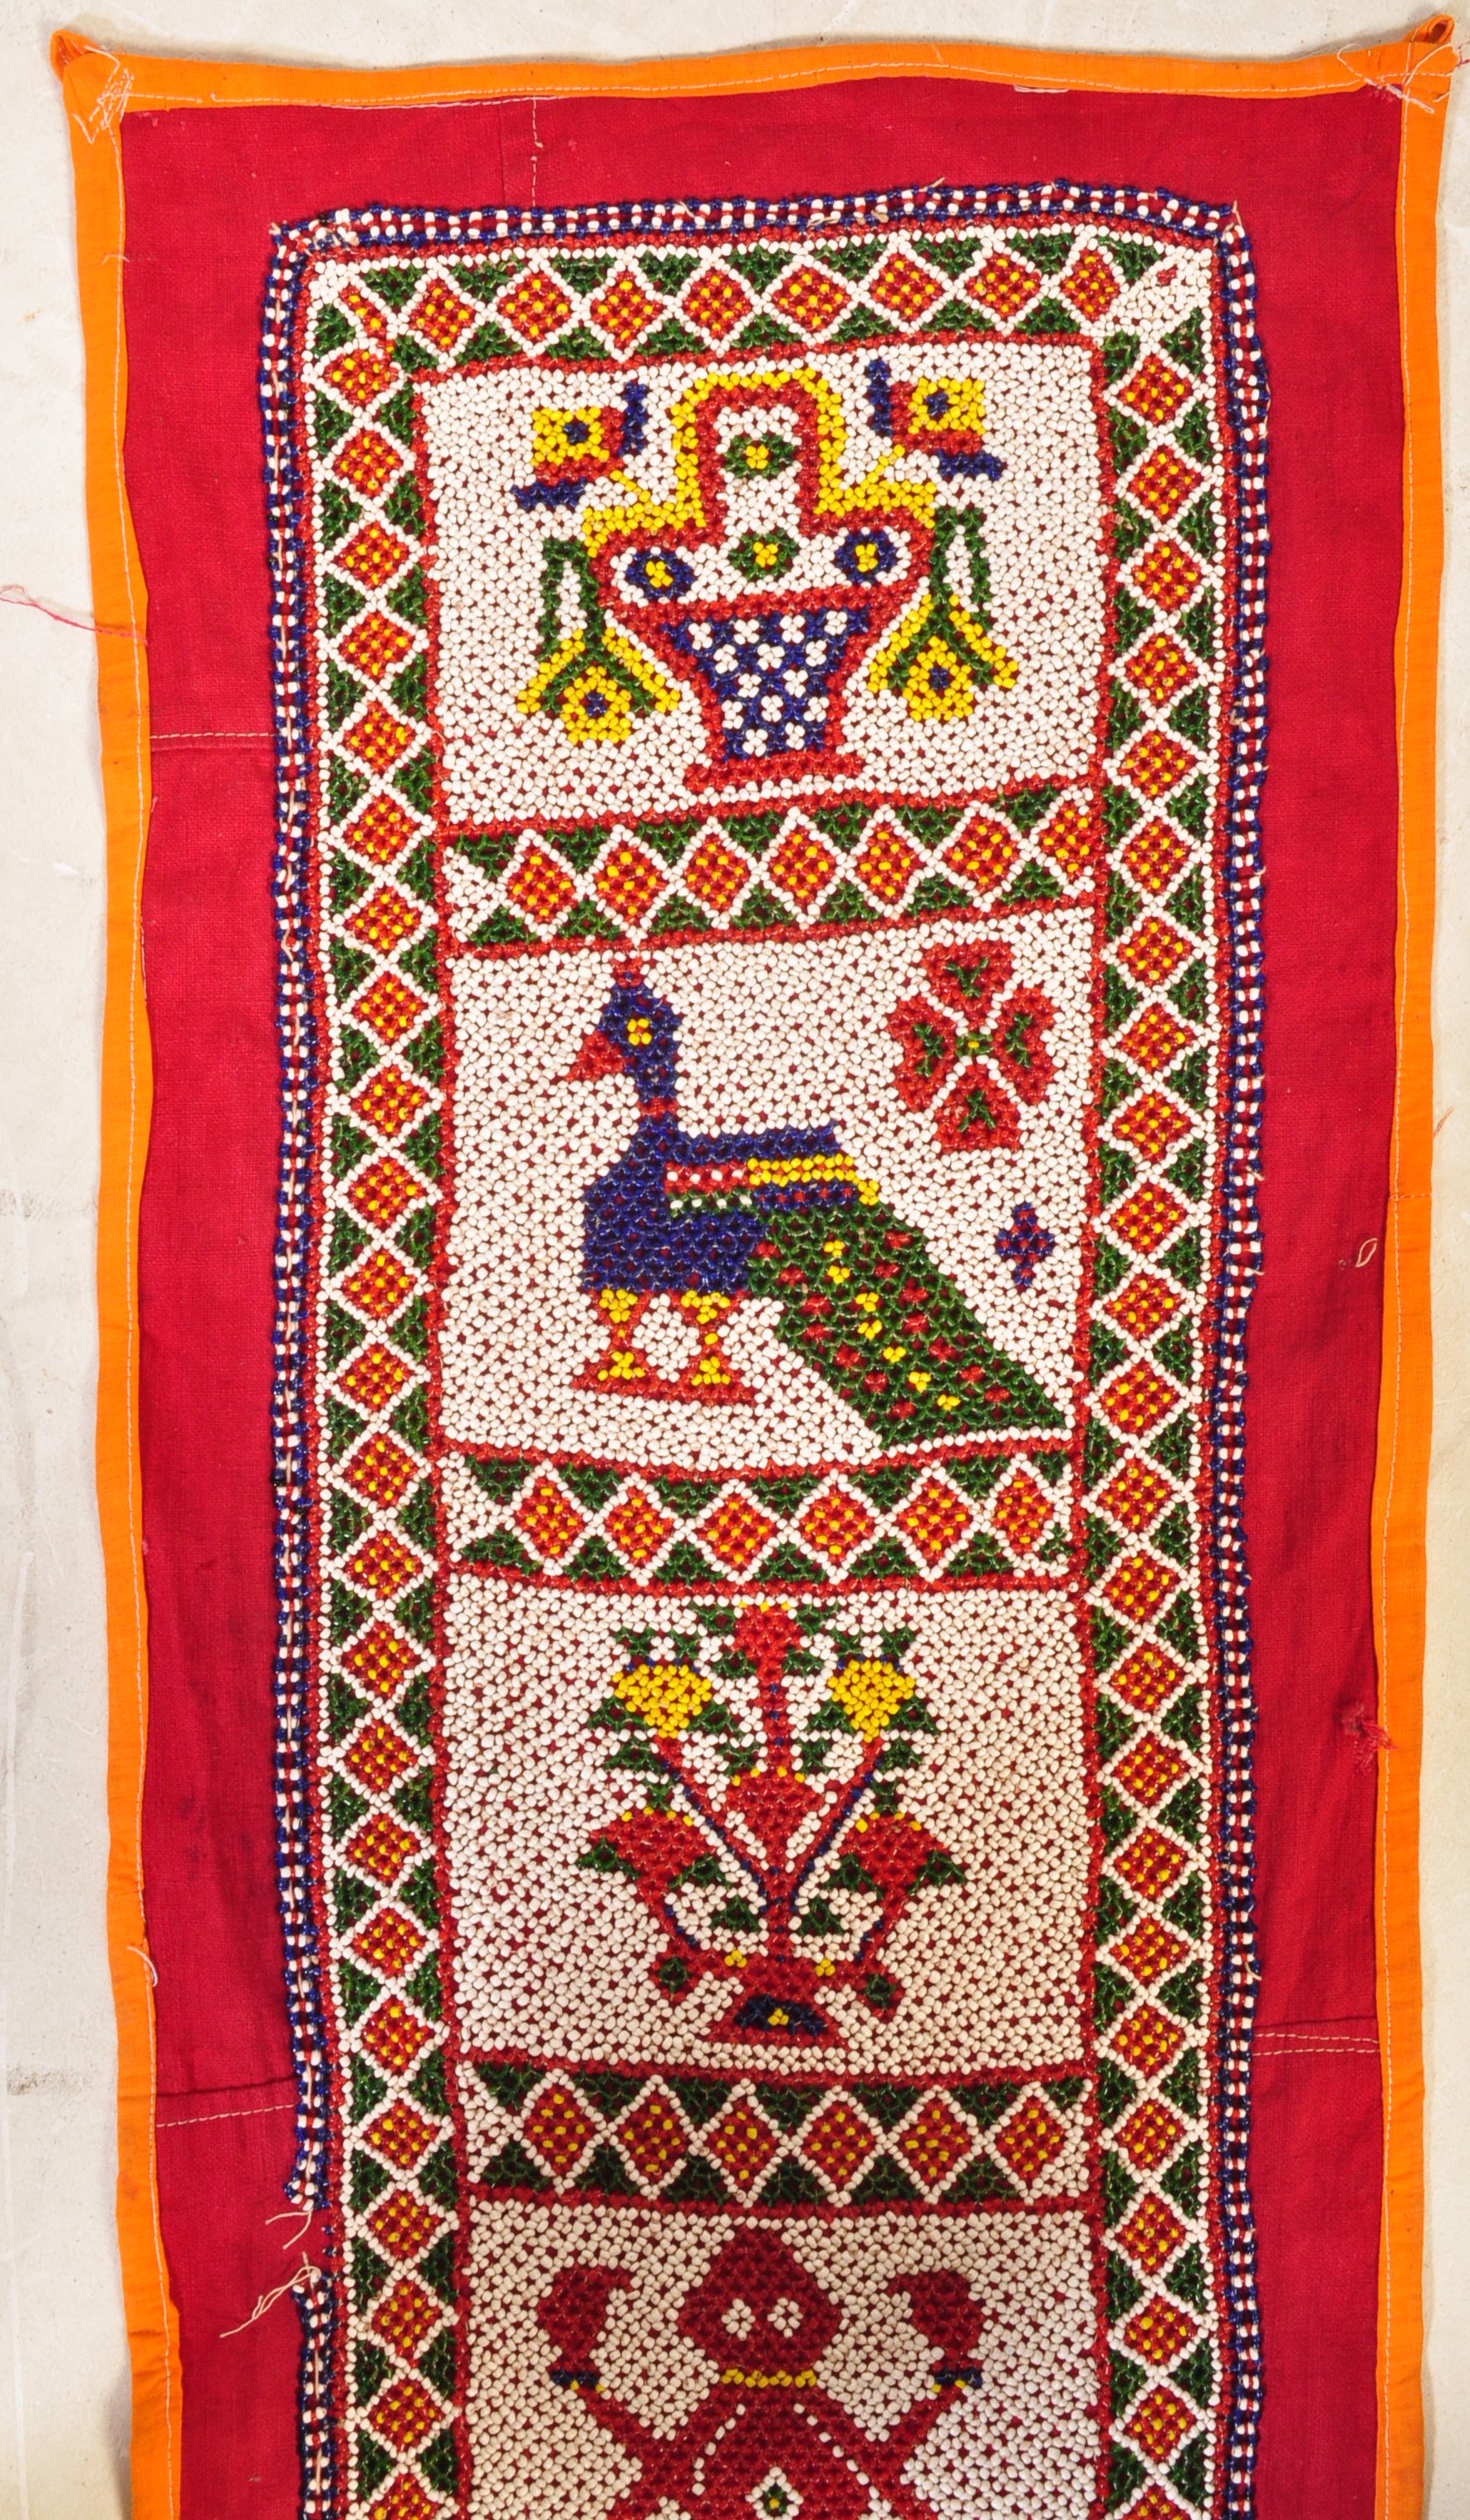 HAND MADE INDIAN BEADWORK WALL HANGING - Image 5 of 6